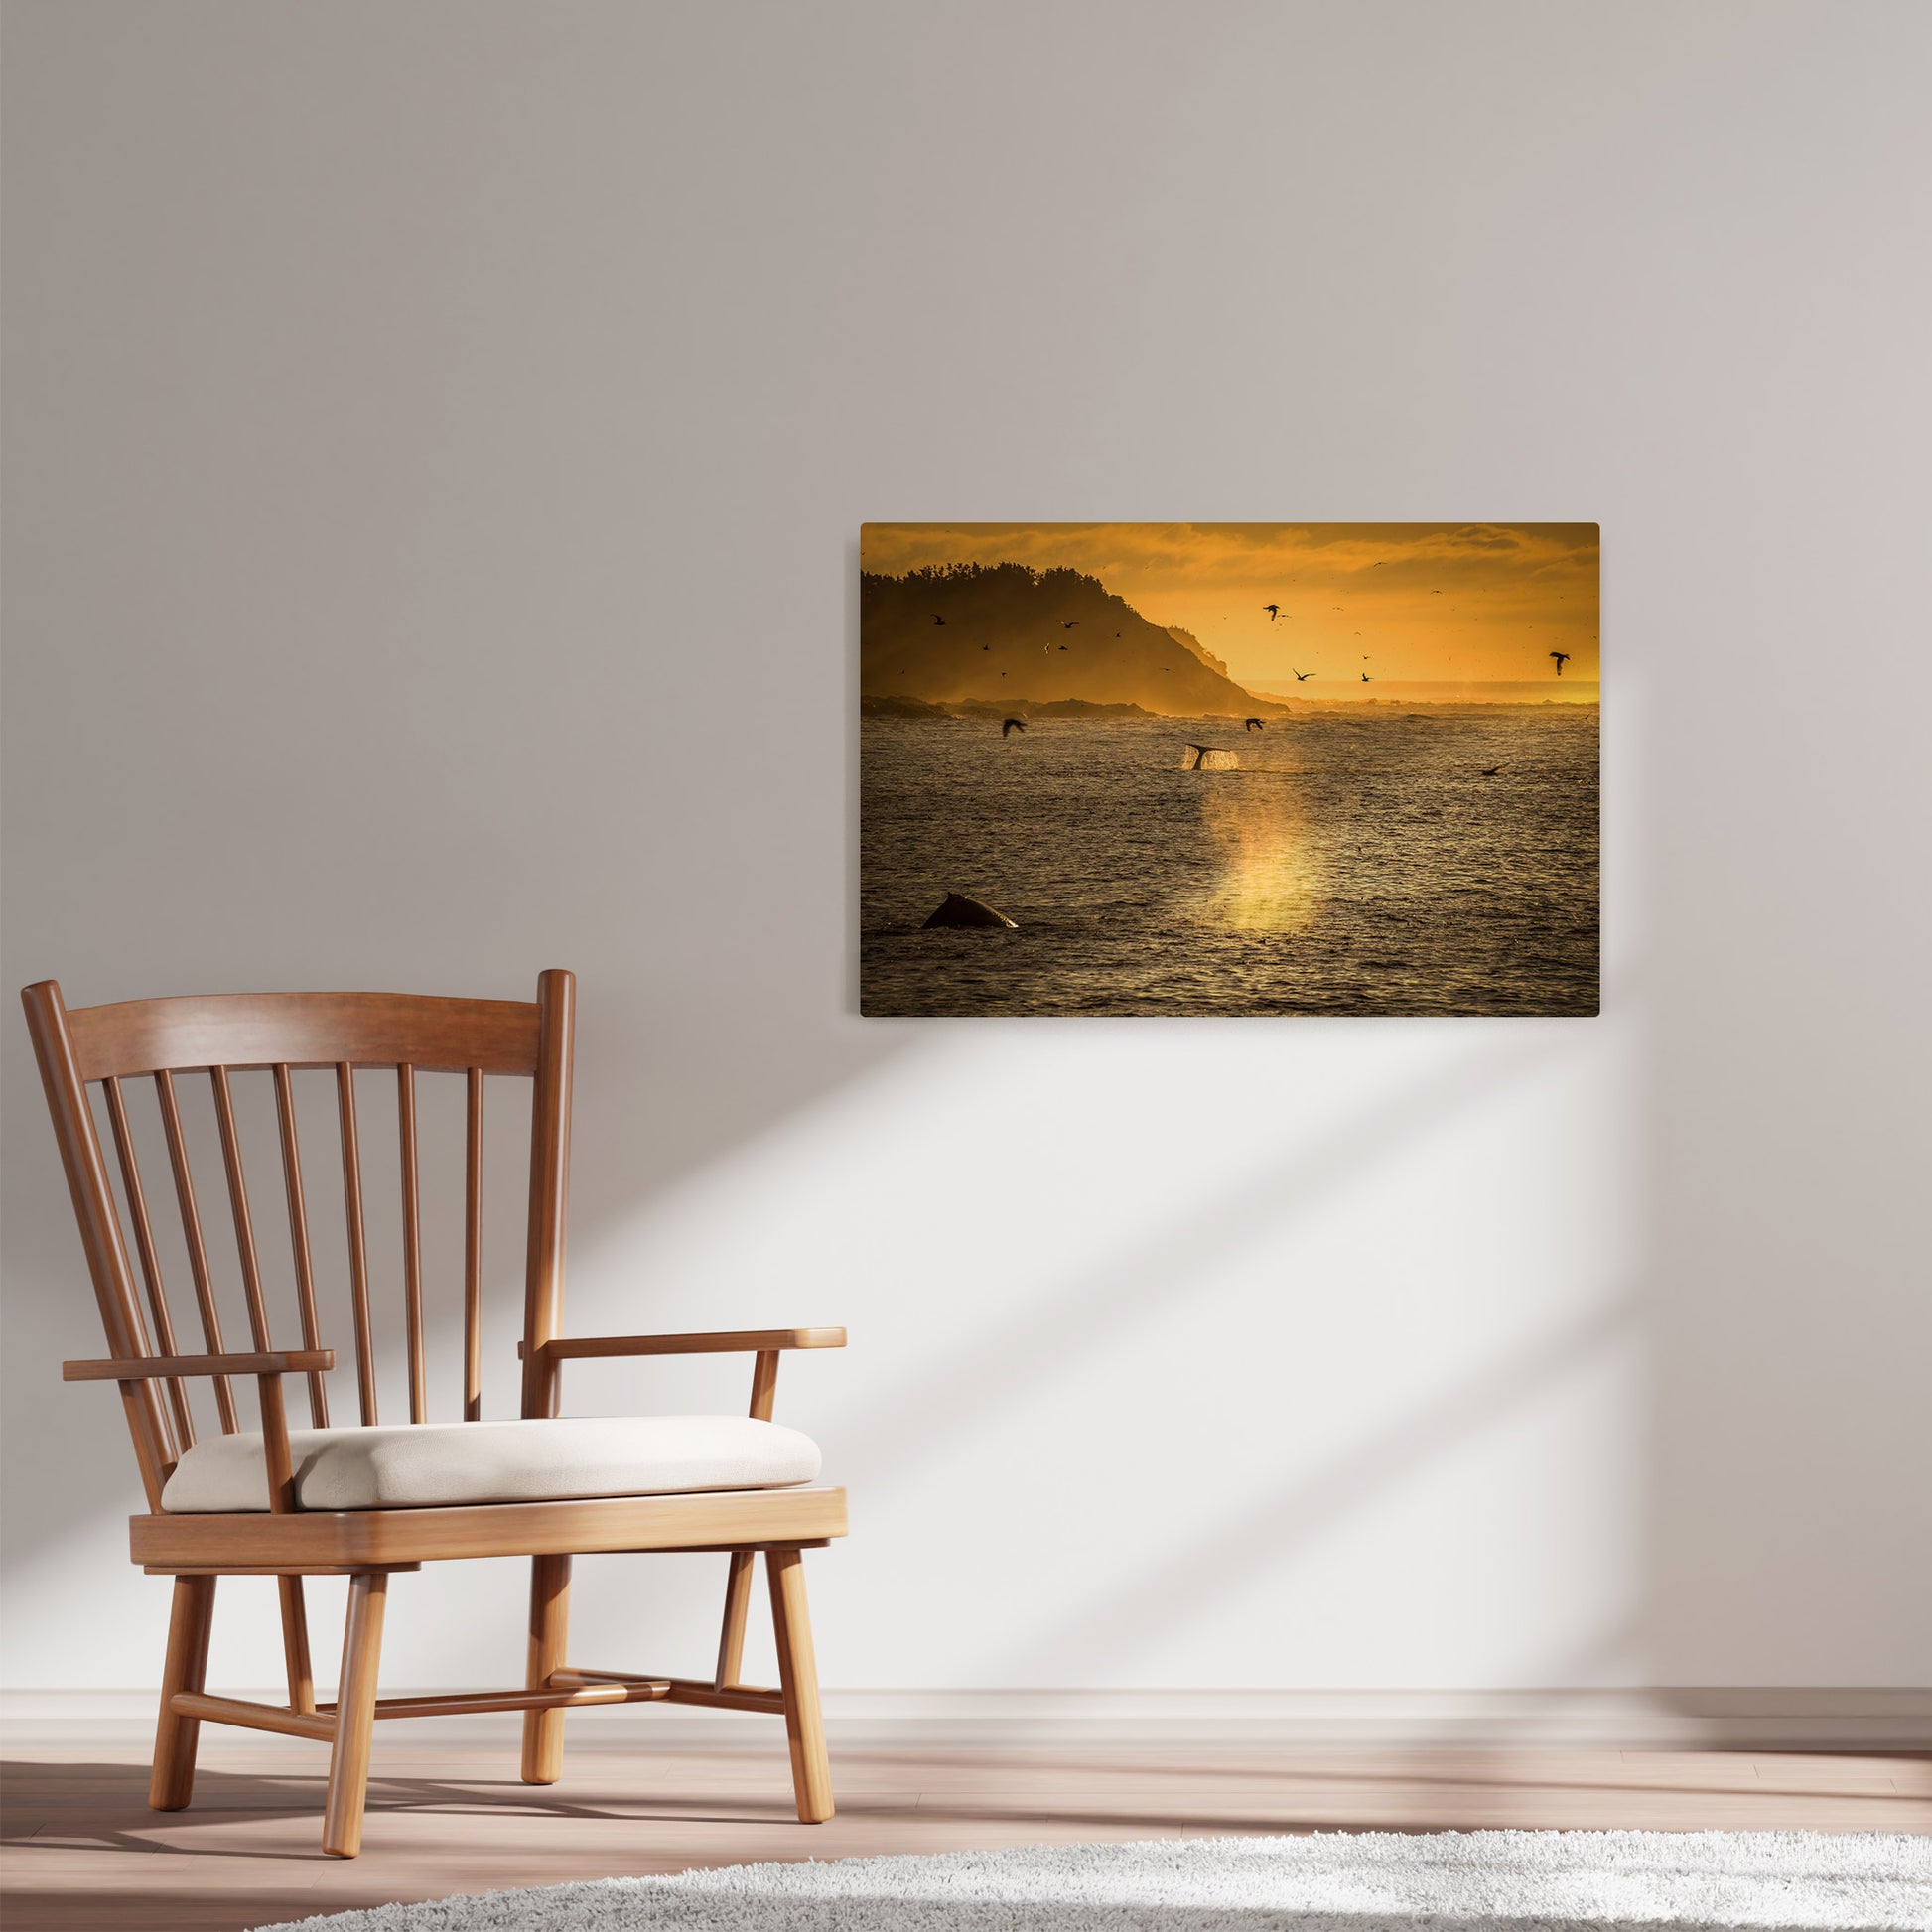 Ray Mackey's Mobile Whales photography reproduced on HD metal print and displayed on wall